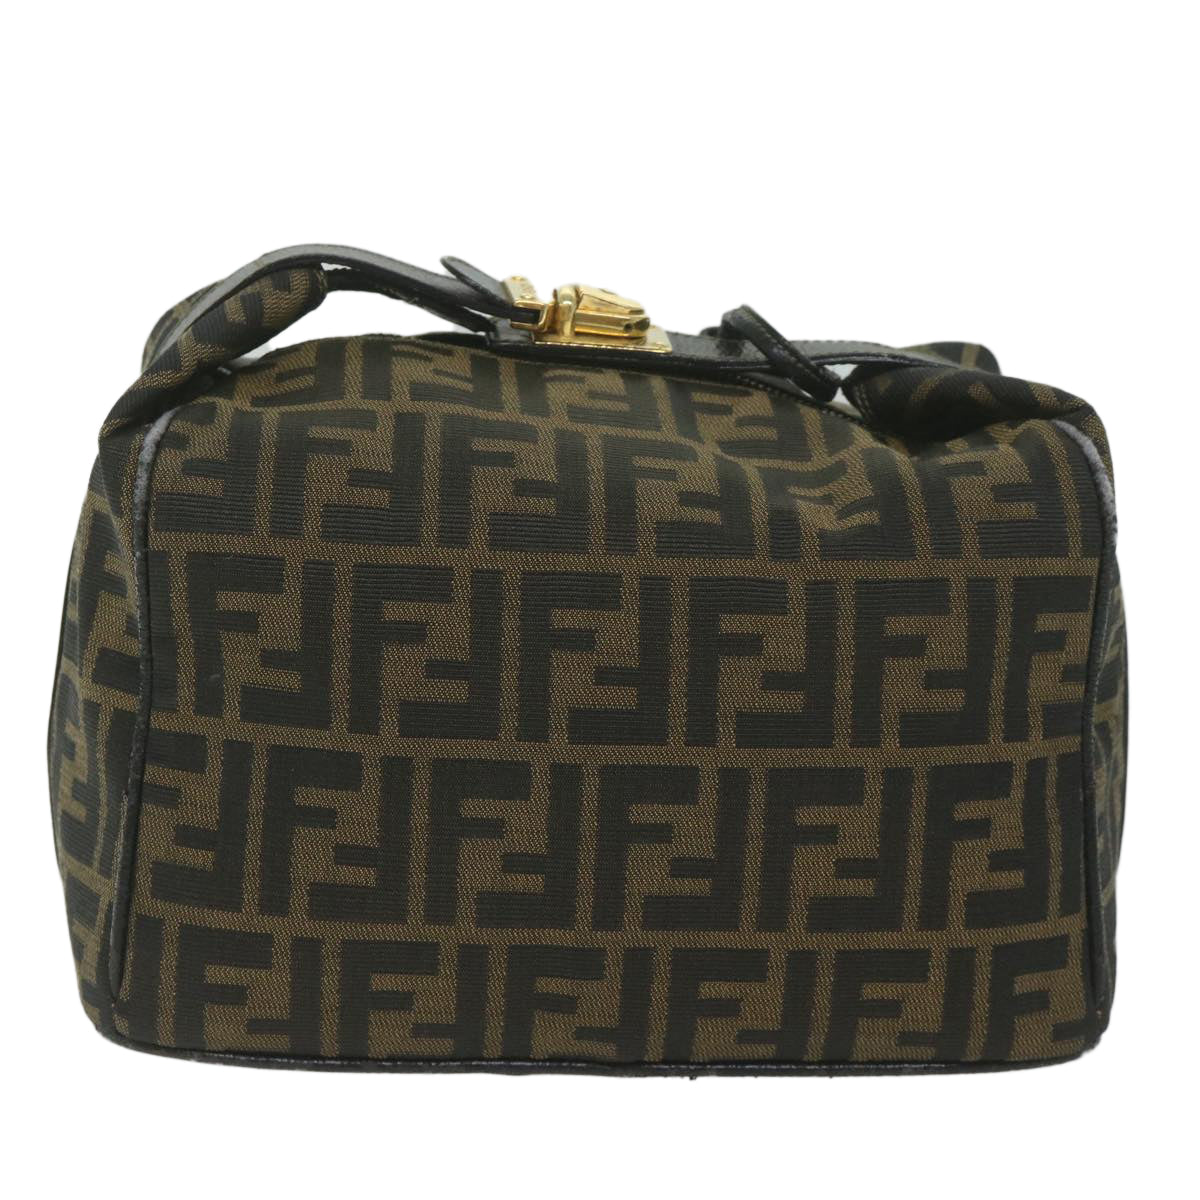 FENDI Zucca Canvas Vanity Cosmetic Pouch Black Brown Auth 61795 - 0